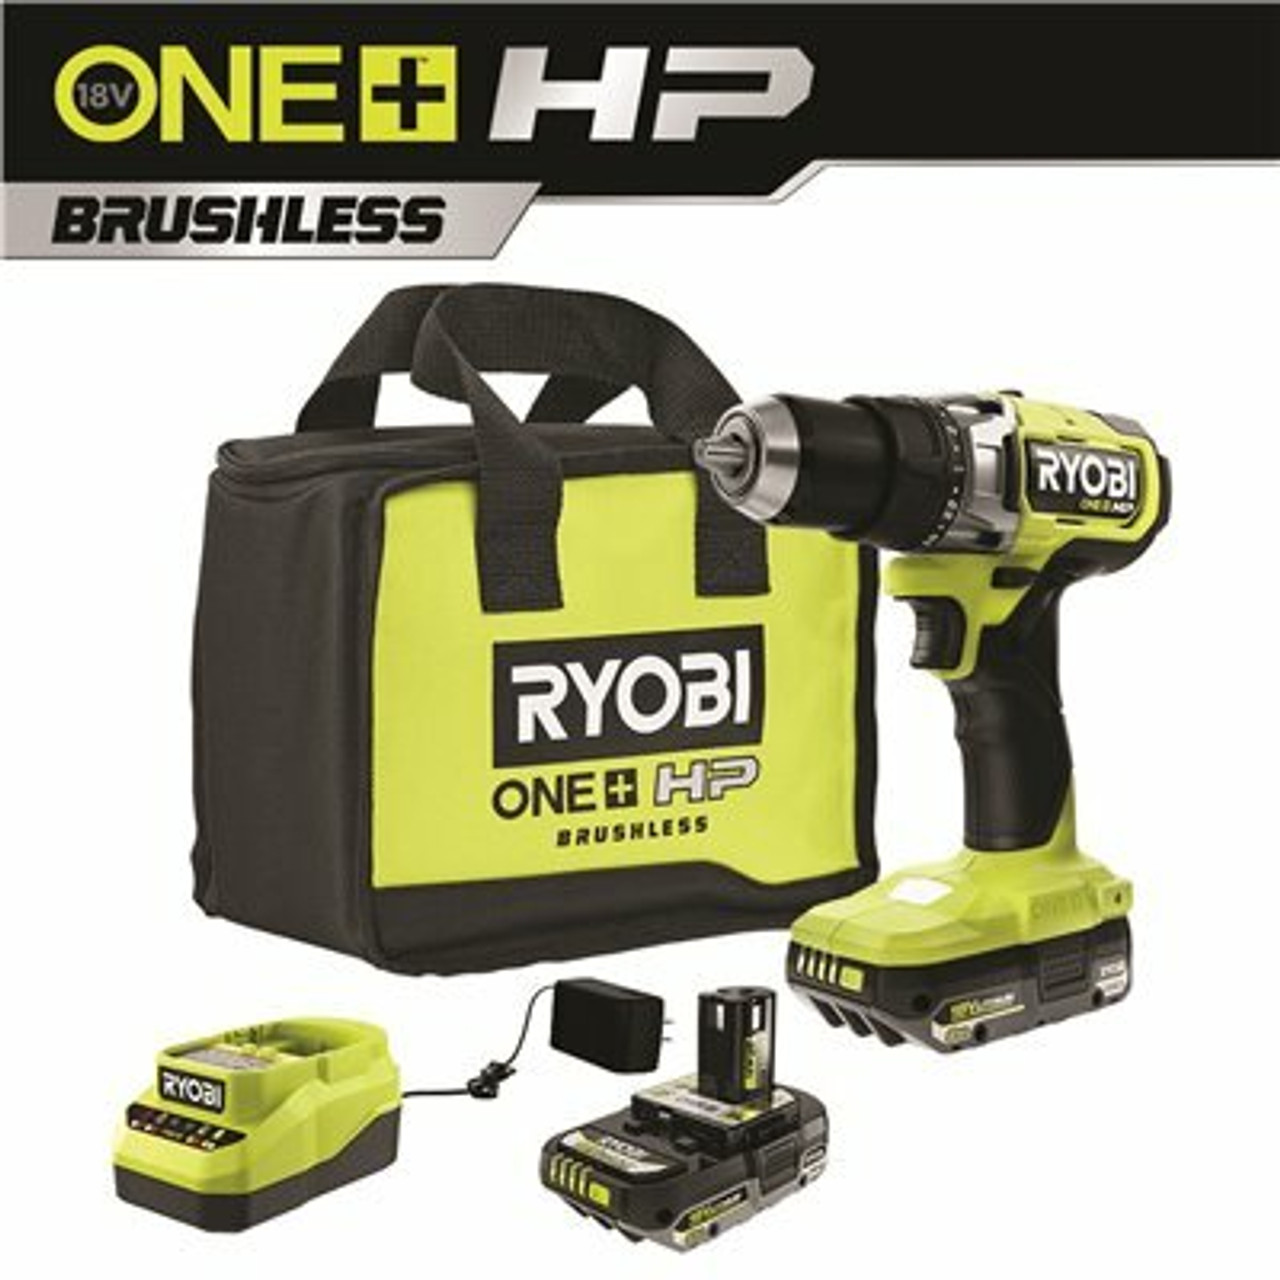 Ryobi One+ Hp 18V Brushless Cordless 1/2 In. Drill/Driver Kit With (2) 2.0 Ah High Performance Batteries, Charger, And Bag